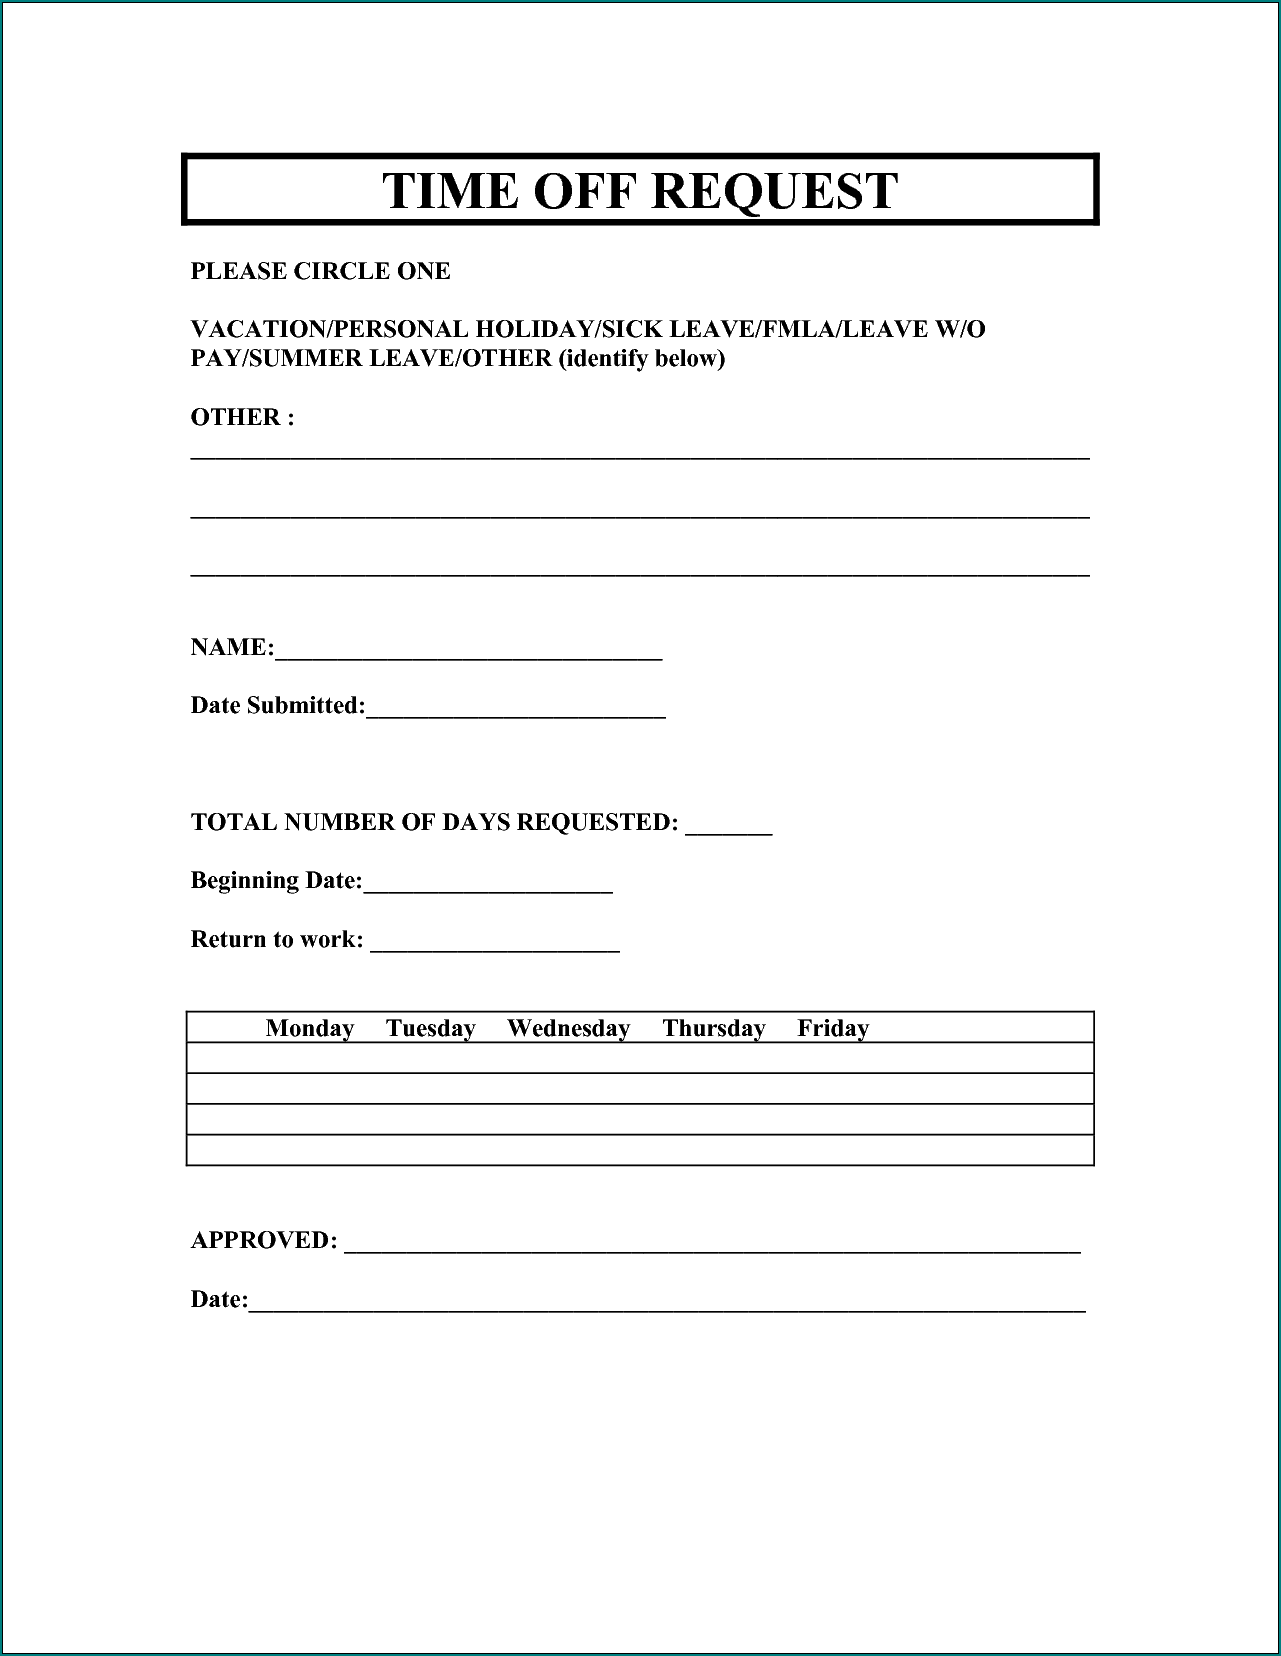 Sample of Request For Time Off Form